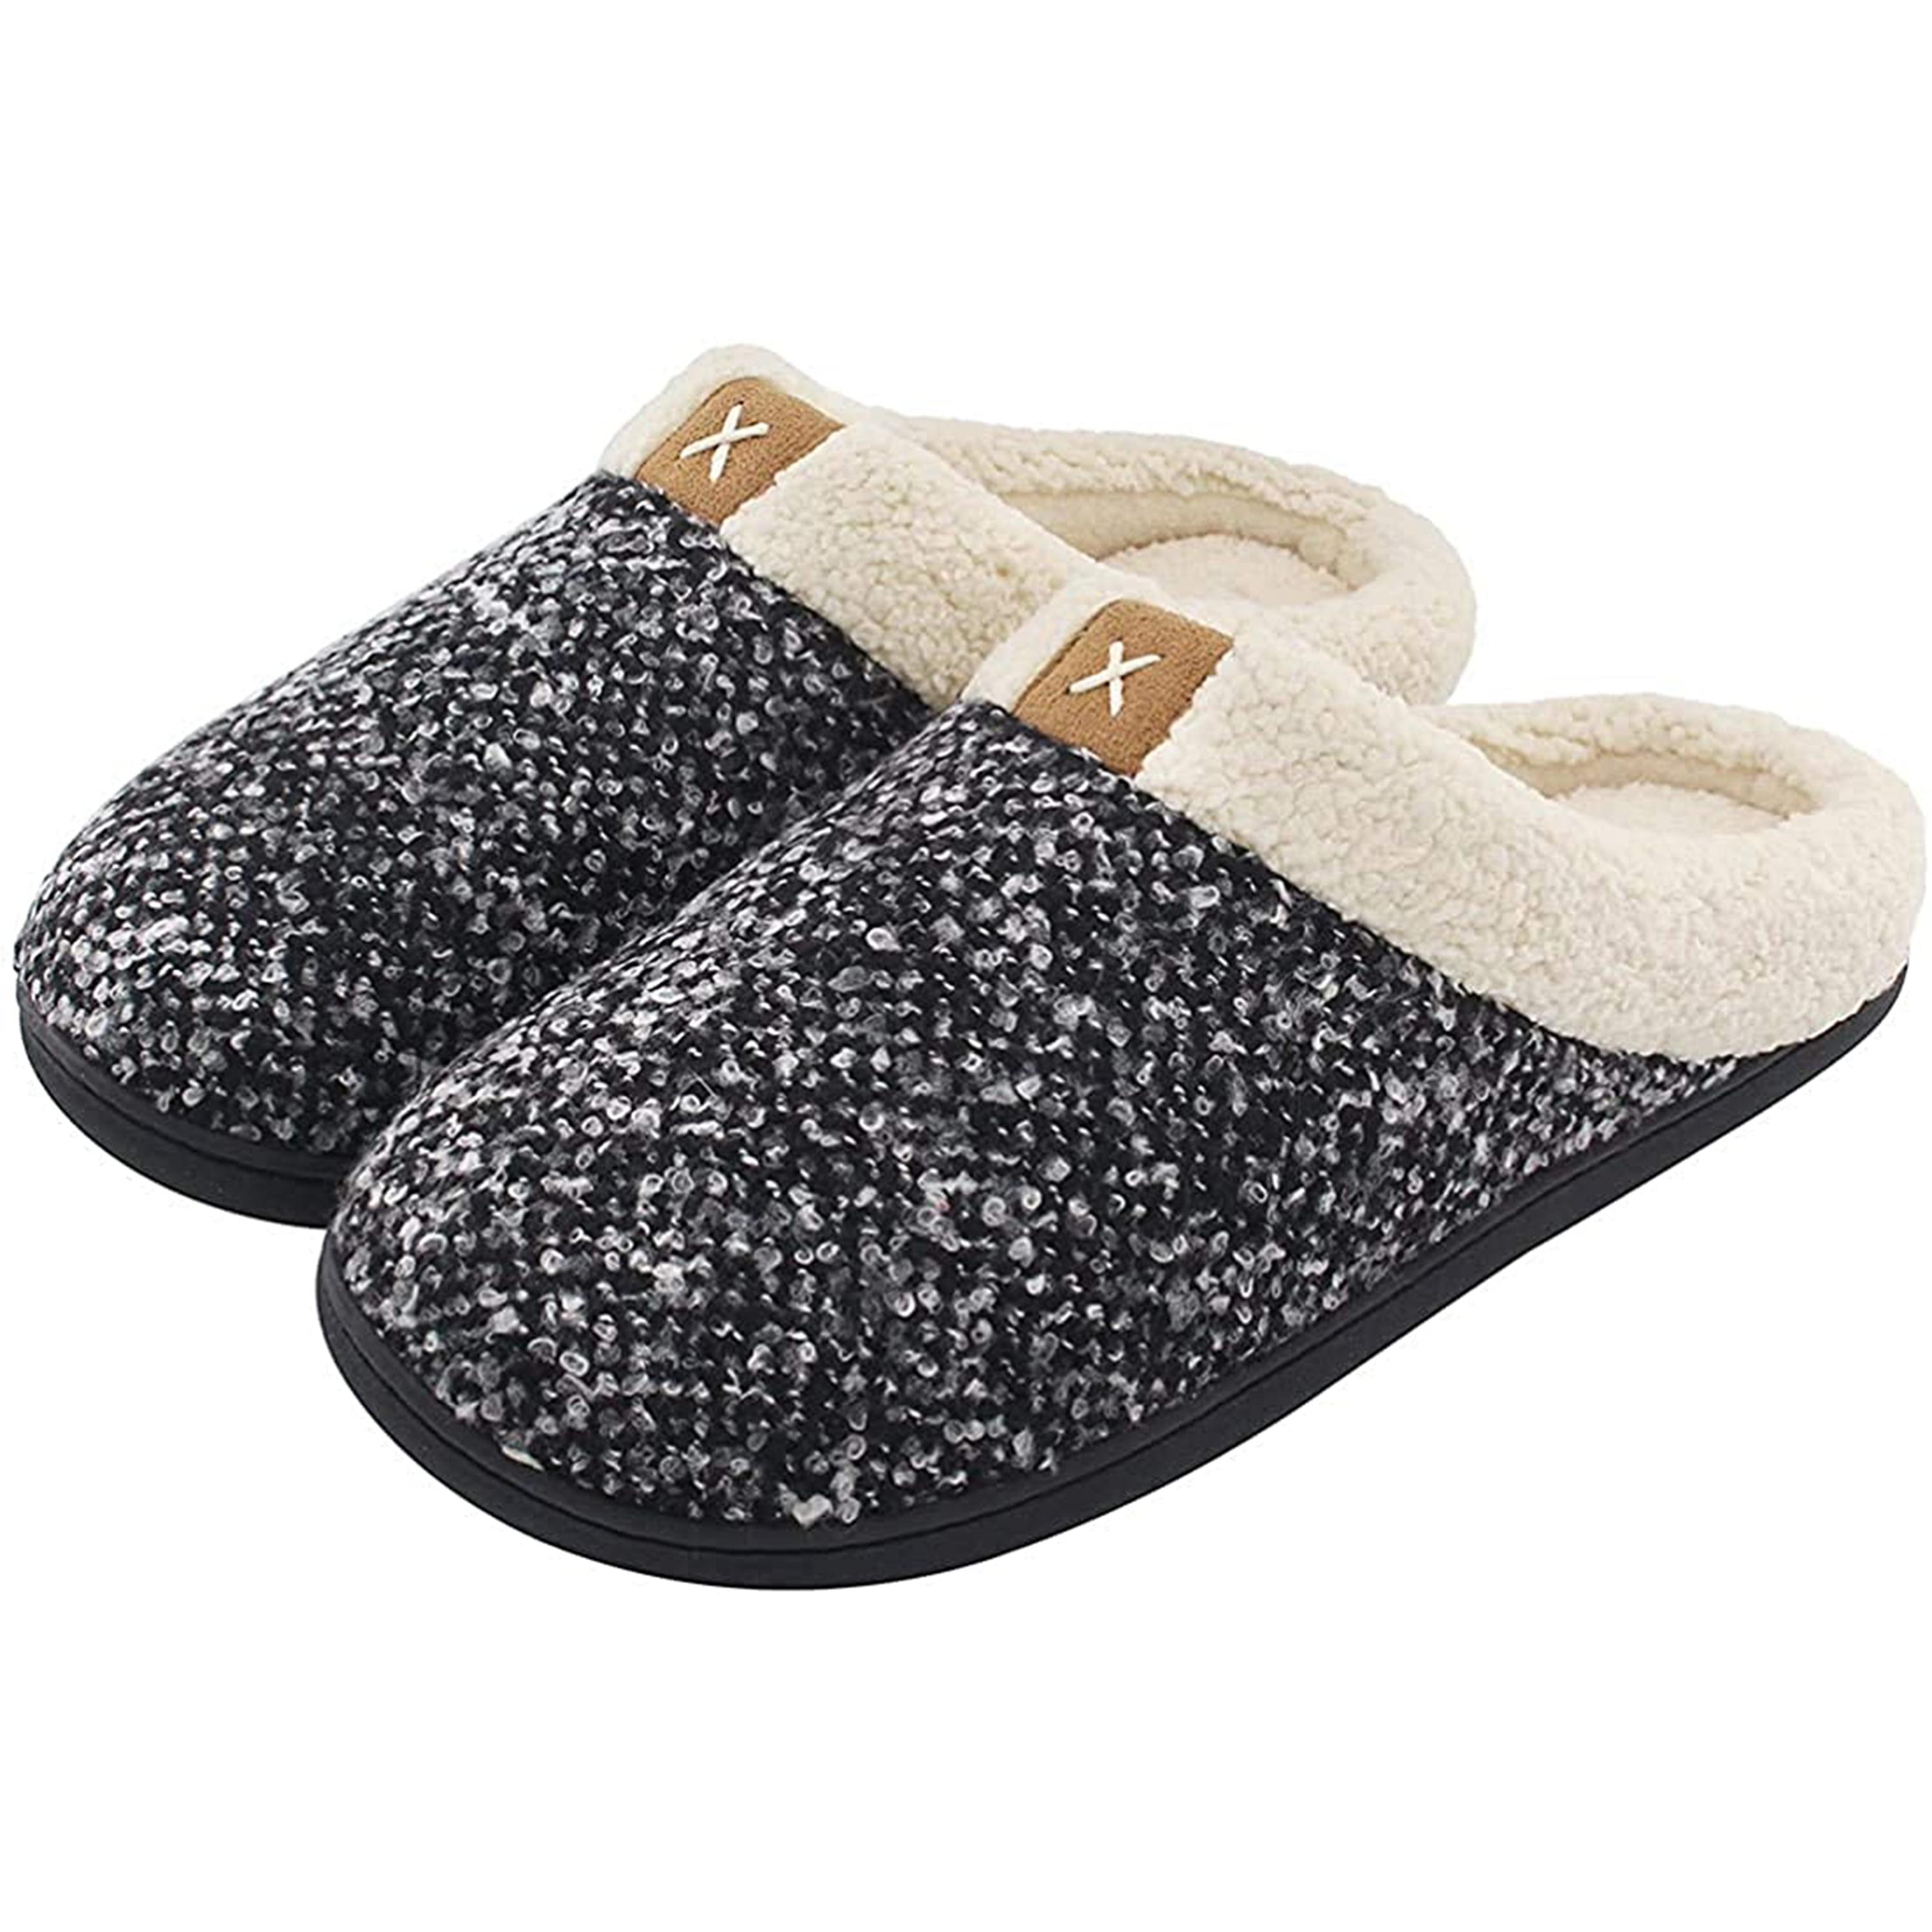 Slip on Clog House Shoes with Indoor Outdoor Anti-Skid Rubber Sole ULTRAIDEAS Men's Cozy Memory Foam Slippers with Fuzzy Plush Wool-Like Lining